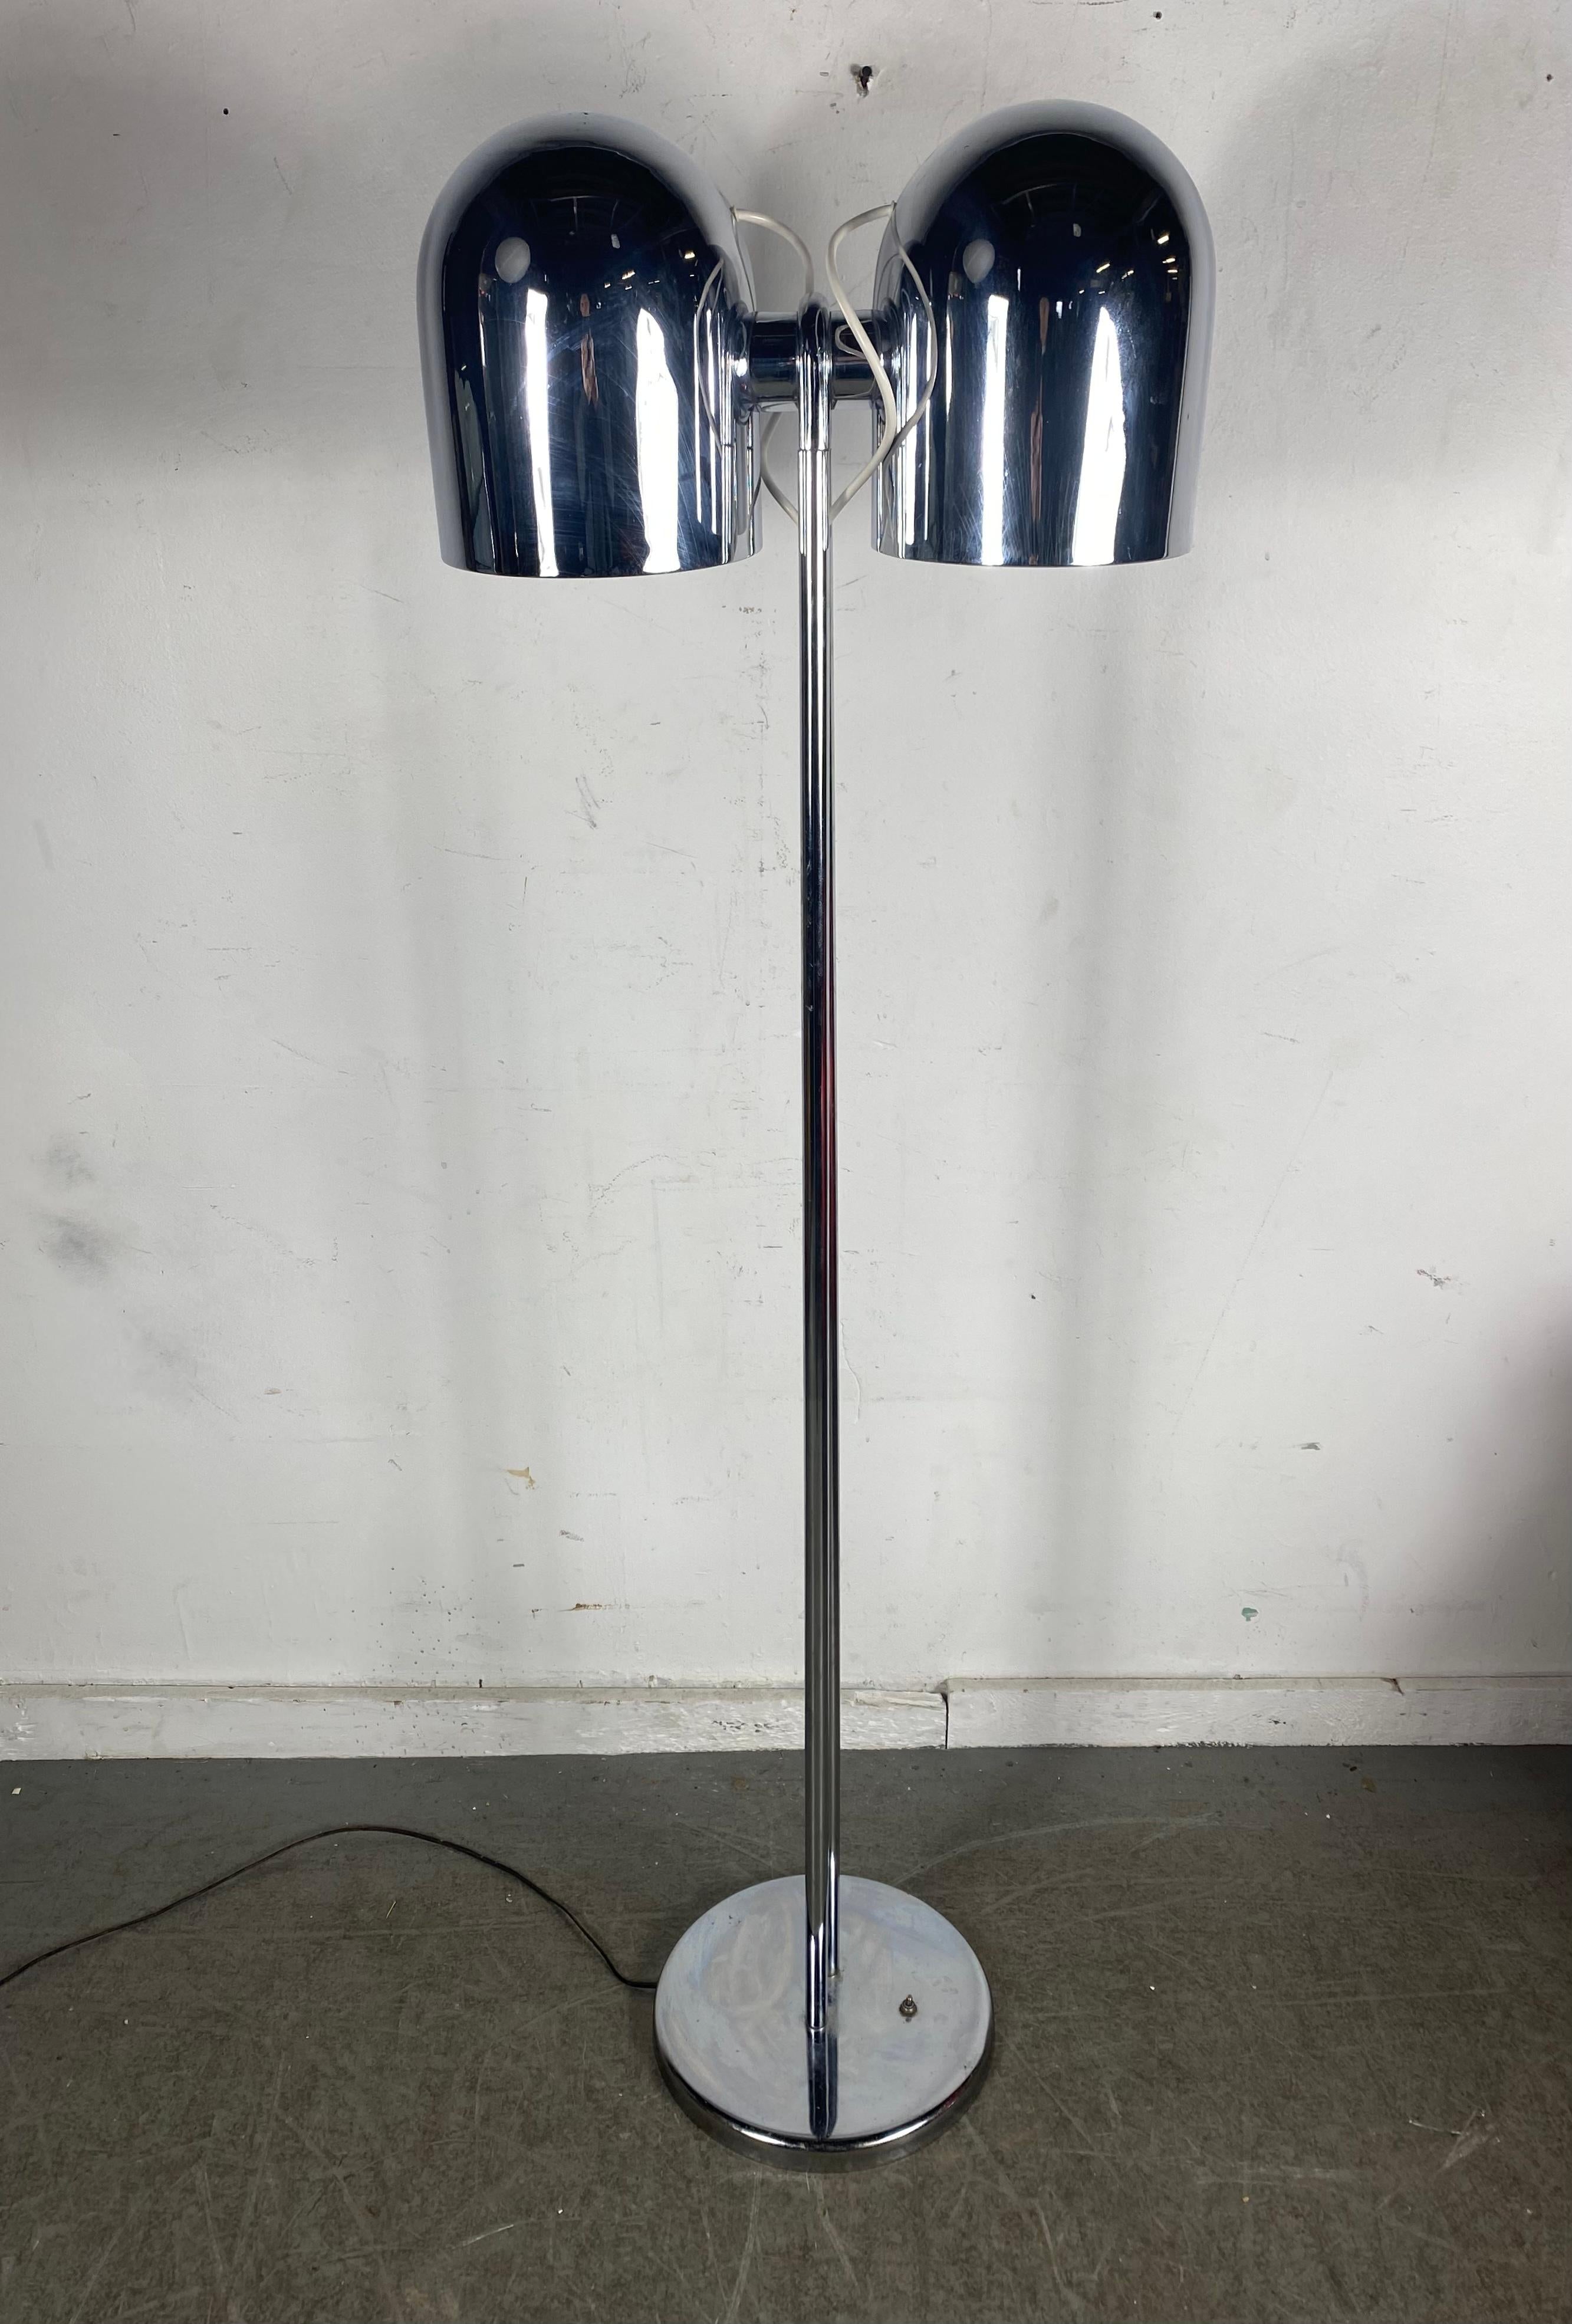 Italian, Mid-Century Modern / Space-age Chrome floor lamp designed by Robert Sonneman,,,Wonderful design. Superior quality and construction. Nice original condition. minor blemishes to base.